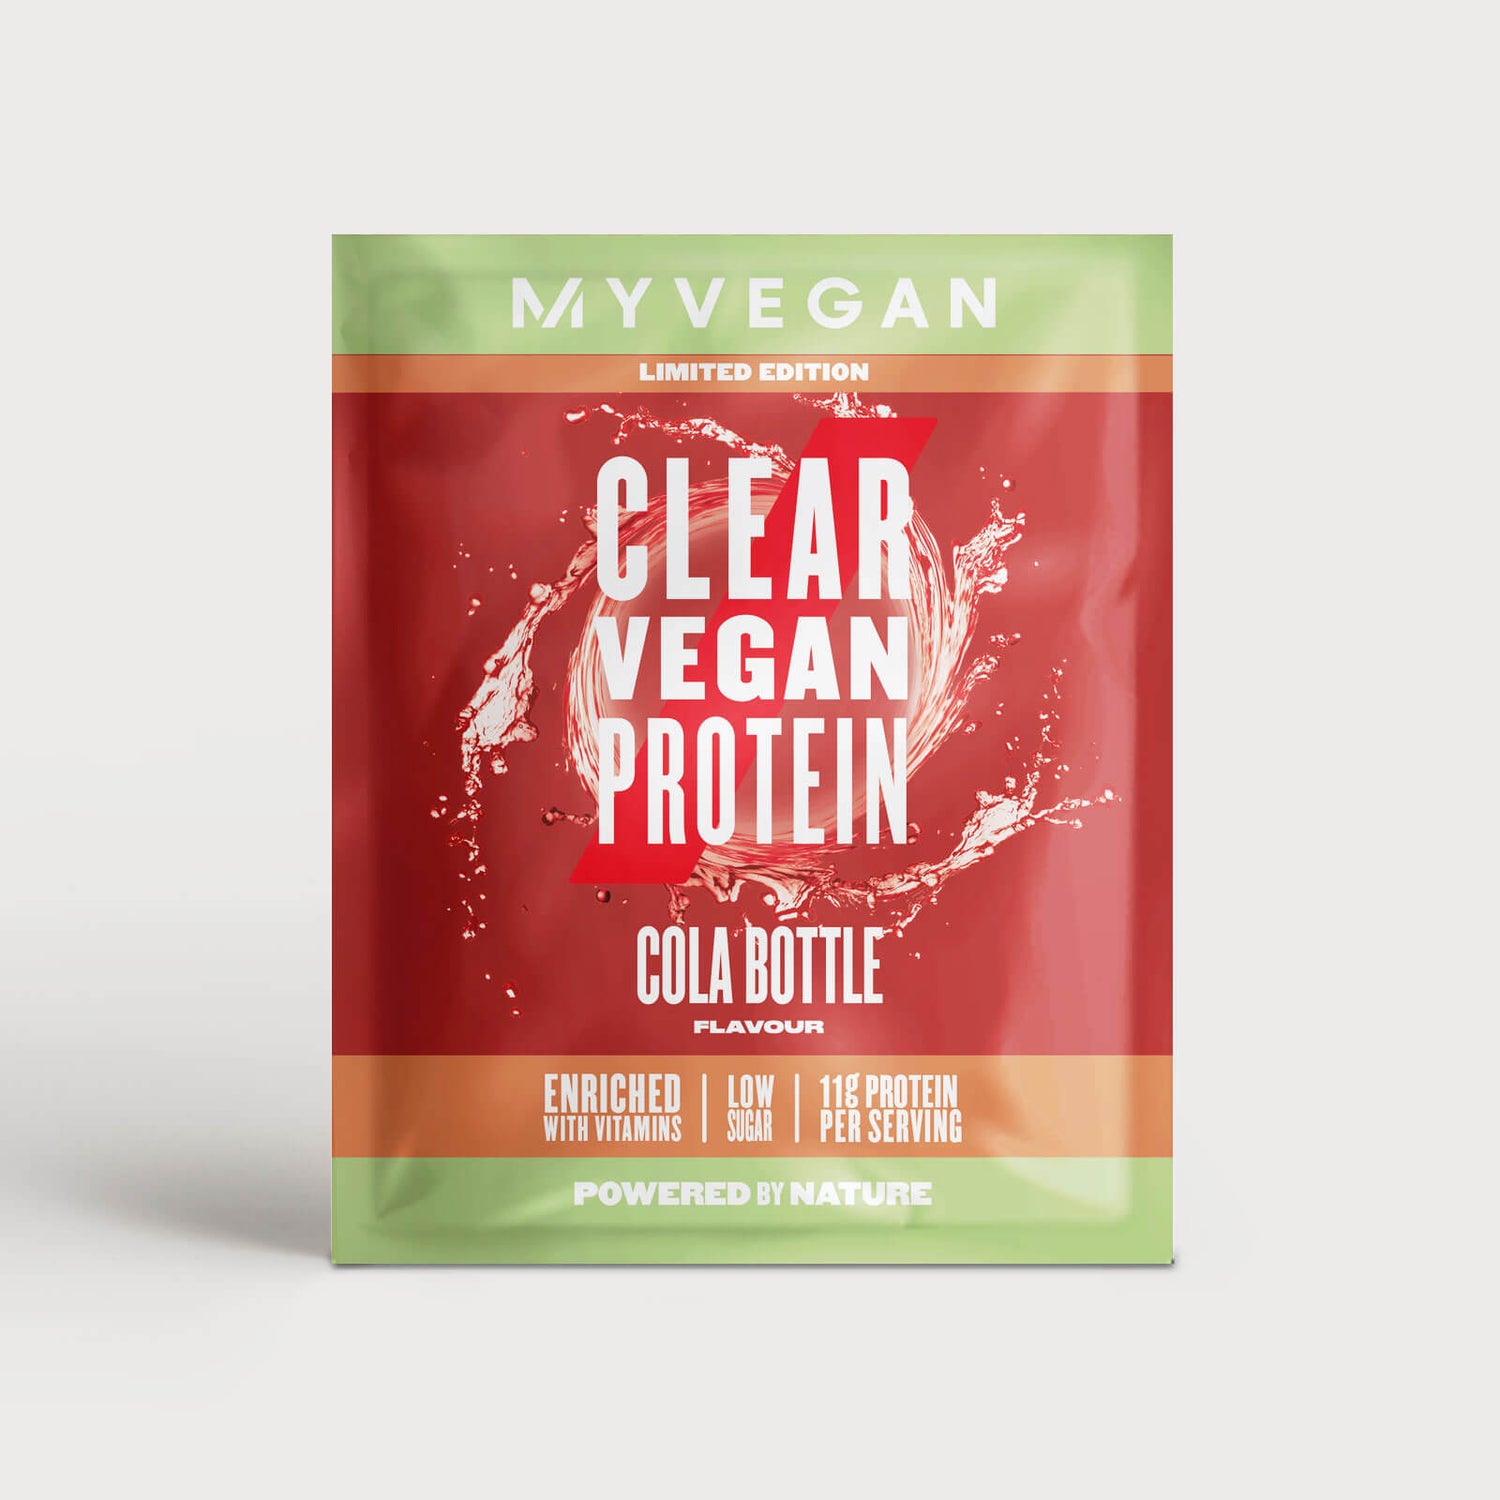 Clear Vegan Protein (paraugs) - 15g - Cola Bottle